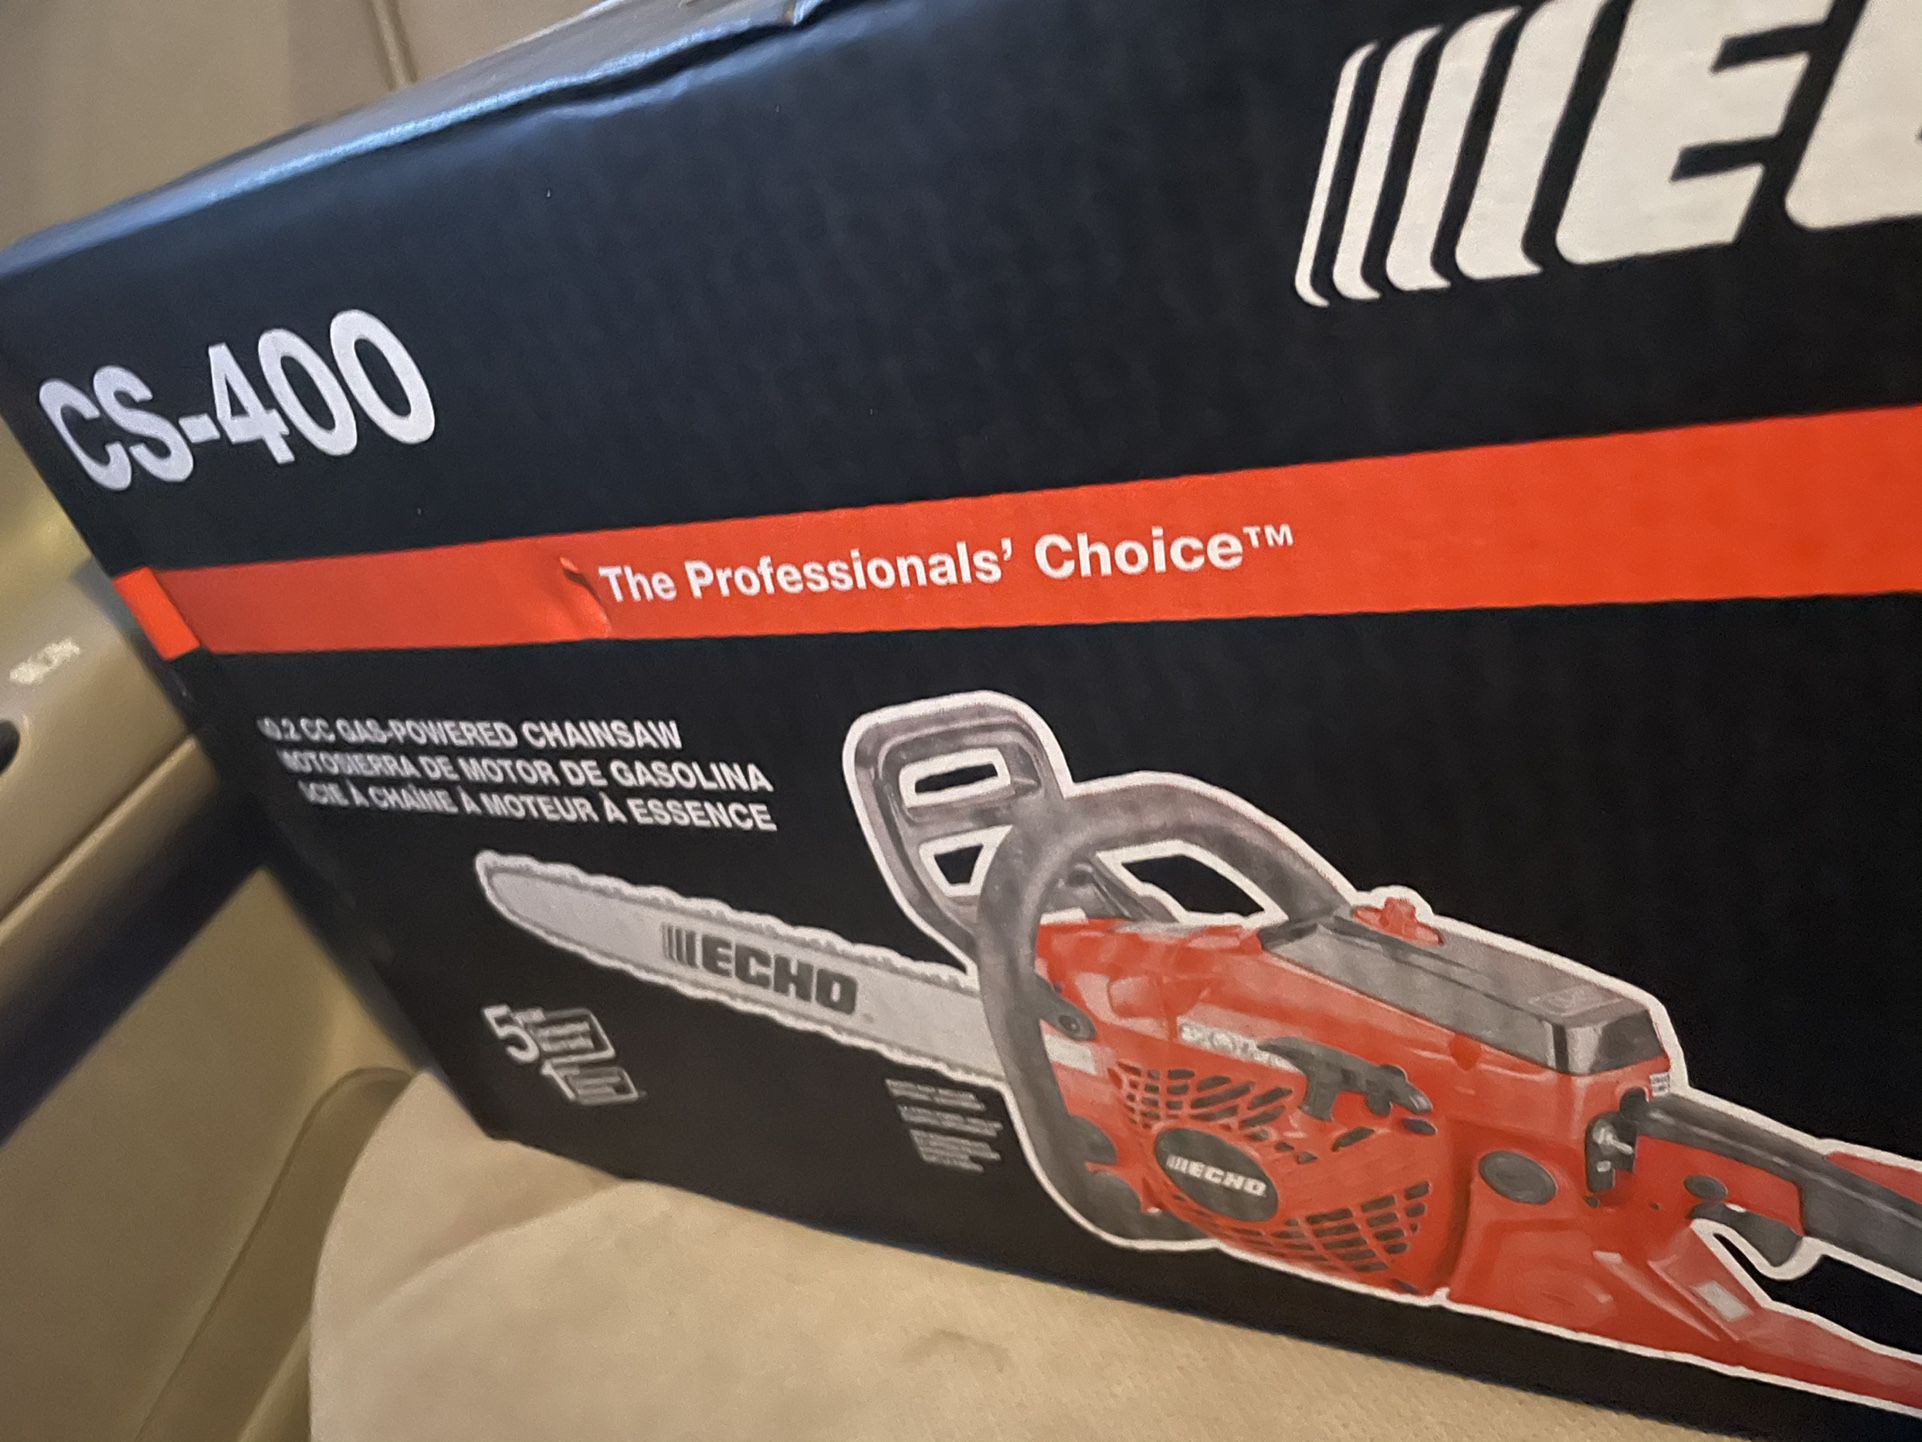 Echo Can-400 Chain Saw ~ Brand New 